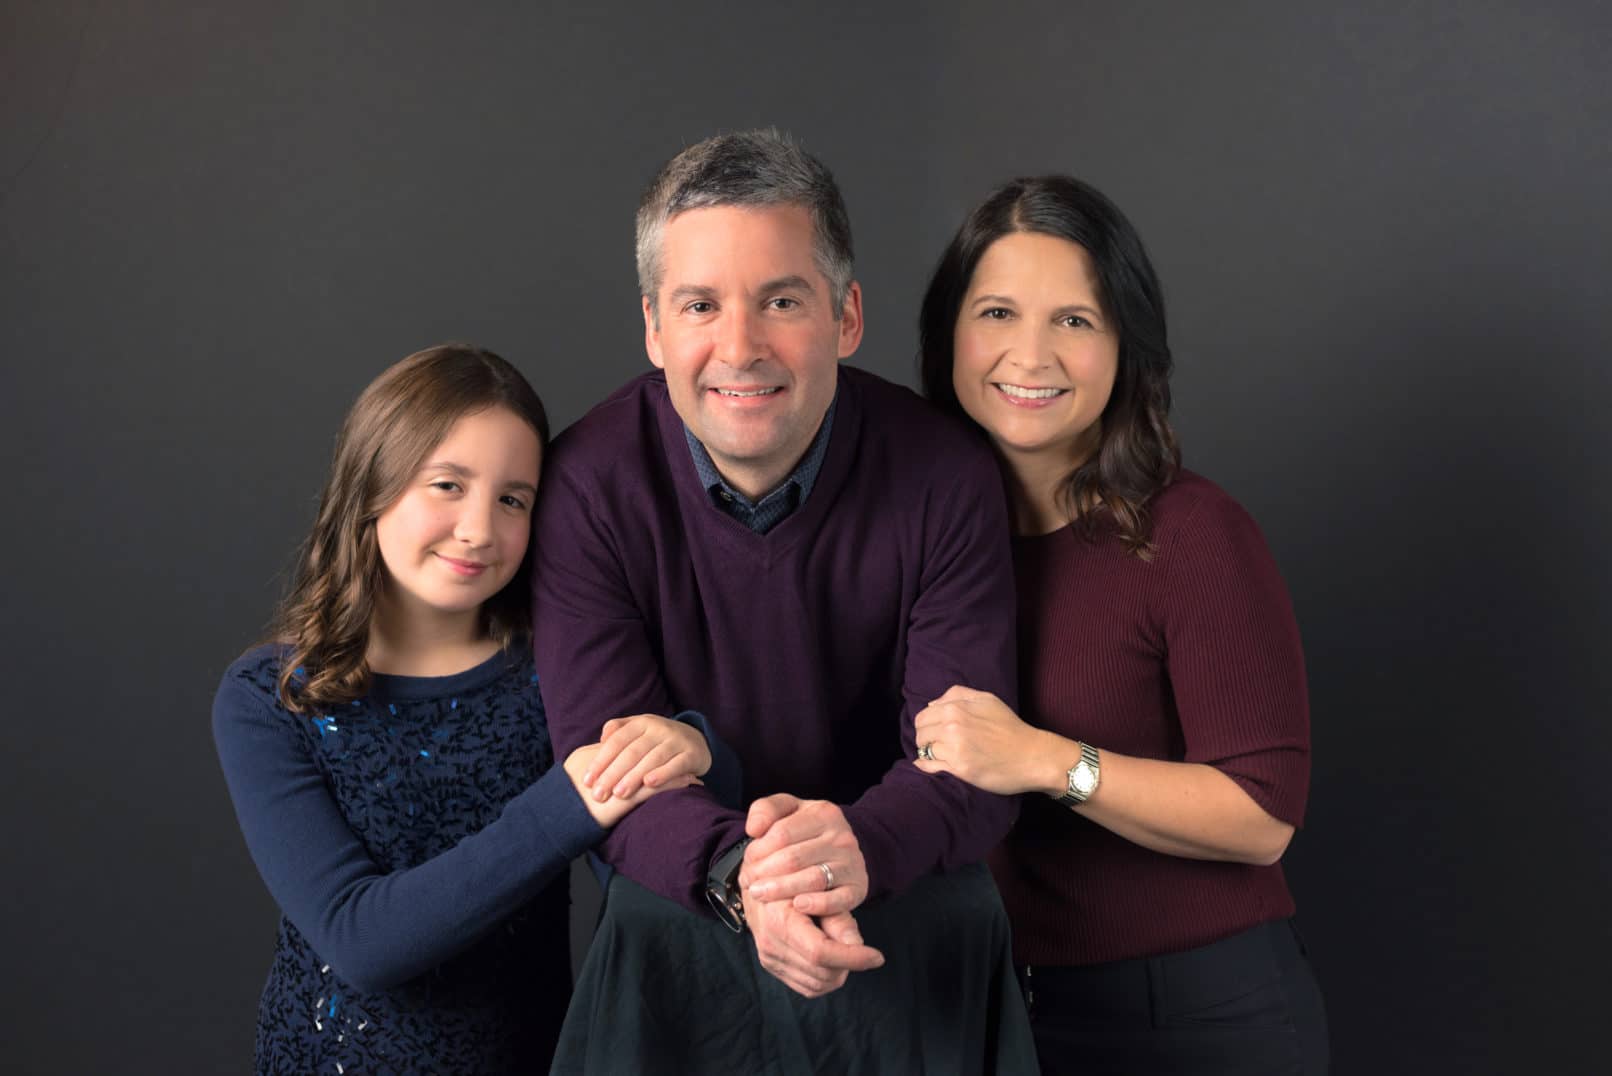 professional studio family portrait of father, mother and young daughter.